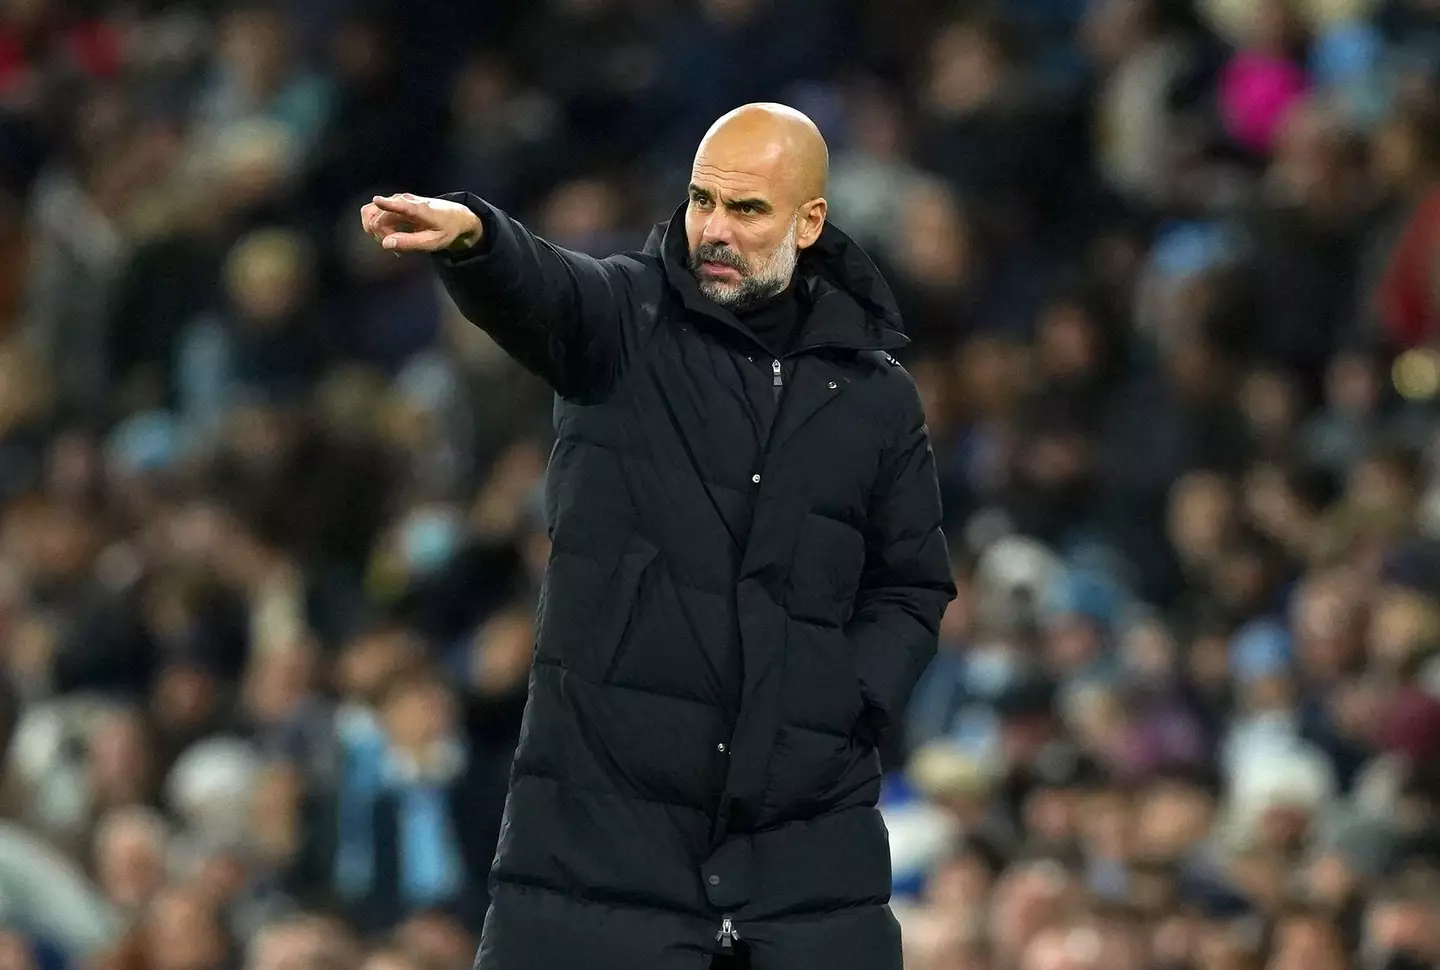 Guardiola has hinted he will leave City when his current deal expires (Image: Alamy)